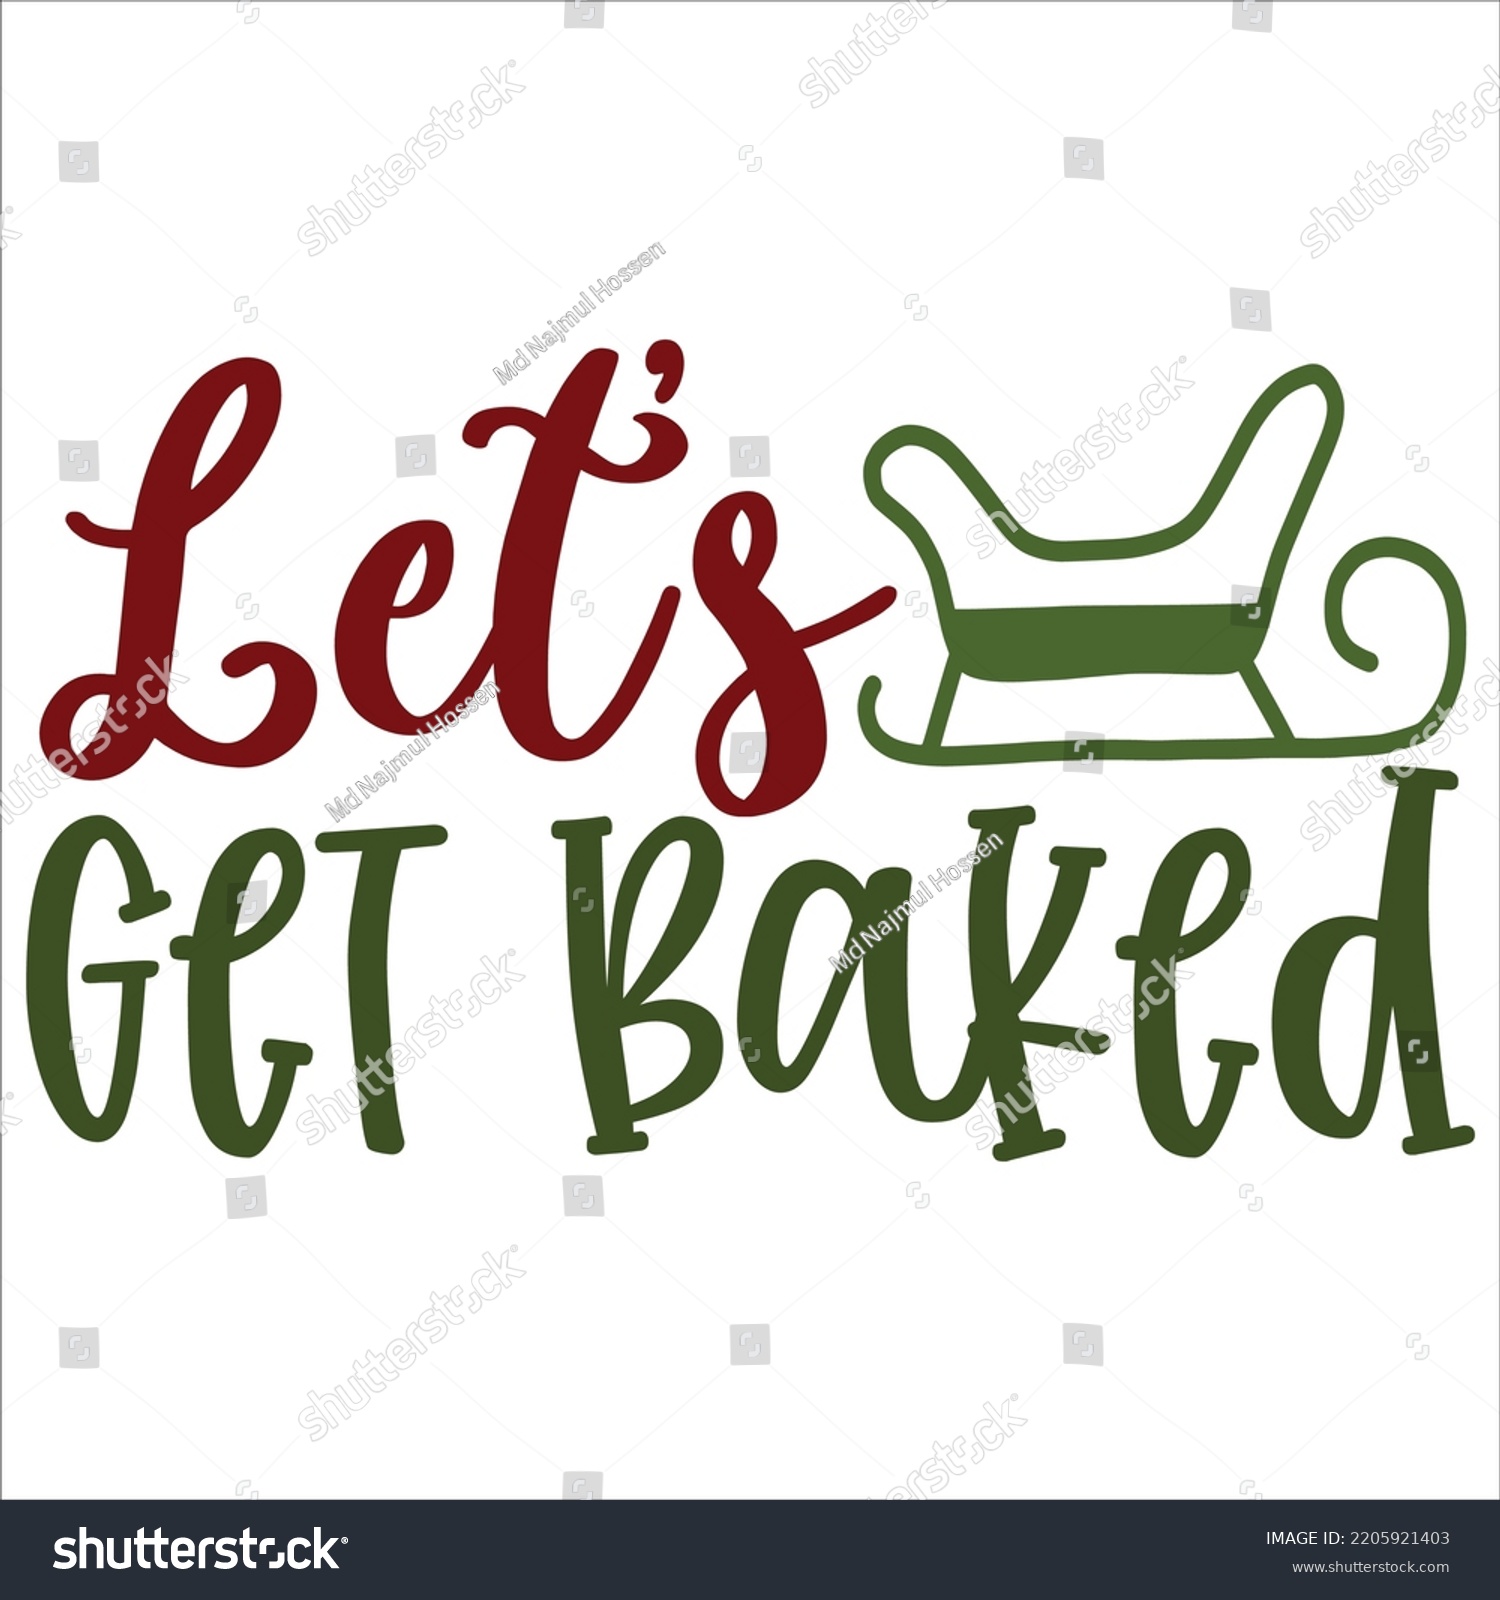 SVG of Let's Get basked, Merry Christmas shirts, mugs, signs lettering with antler vector illustration for Christmas hand lettered, svg, Christmas svg, Christmas Clipart Silhouette cutting svg